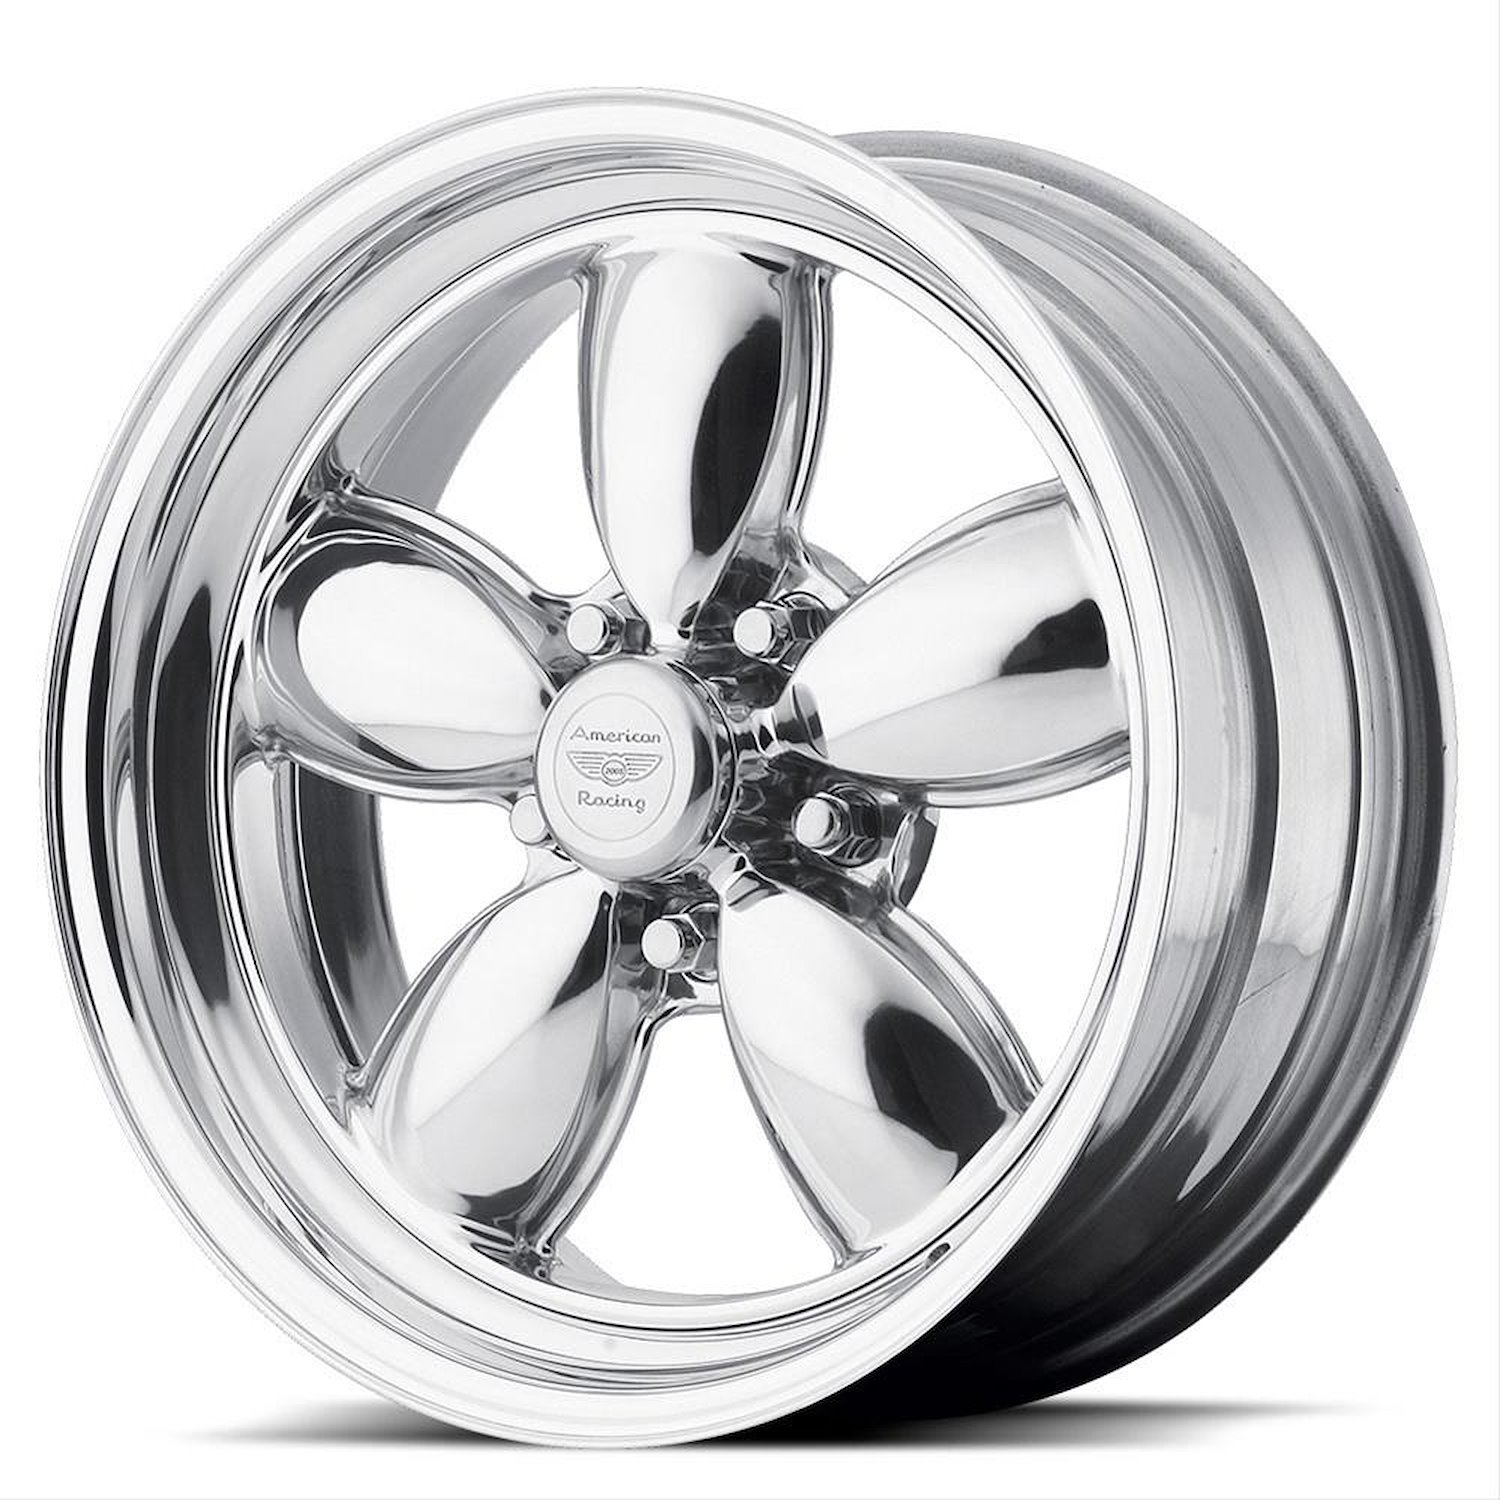 AMERICAN RACING CLASSIC 200S TWO-PIECE POLISHED 17 x 9.5 5x4.5 25 6.23